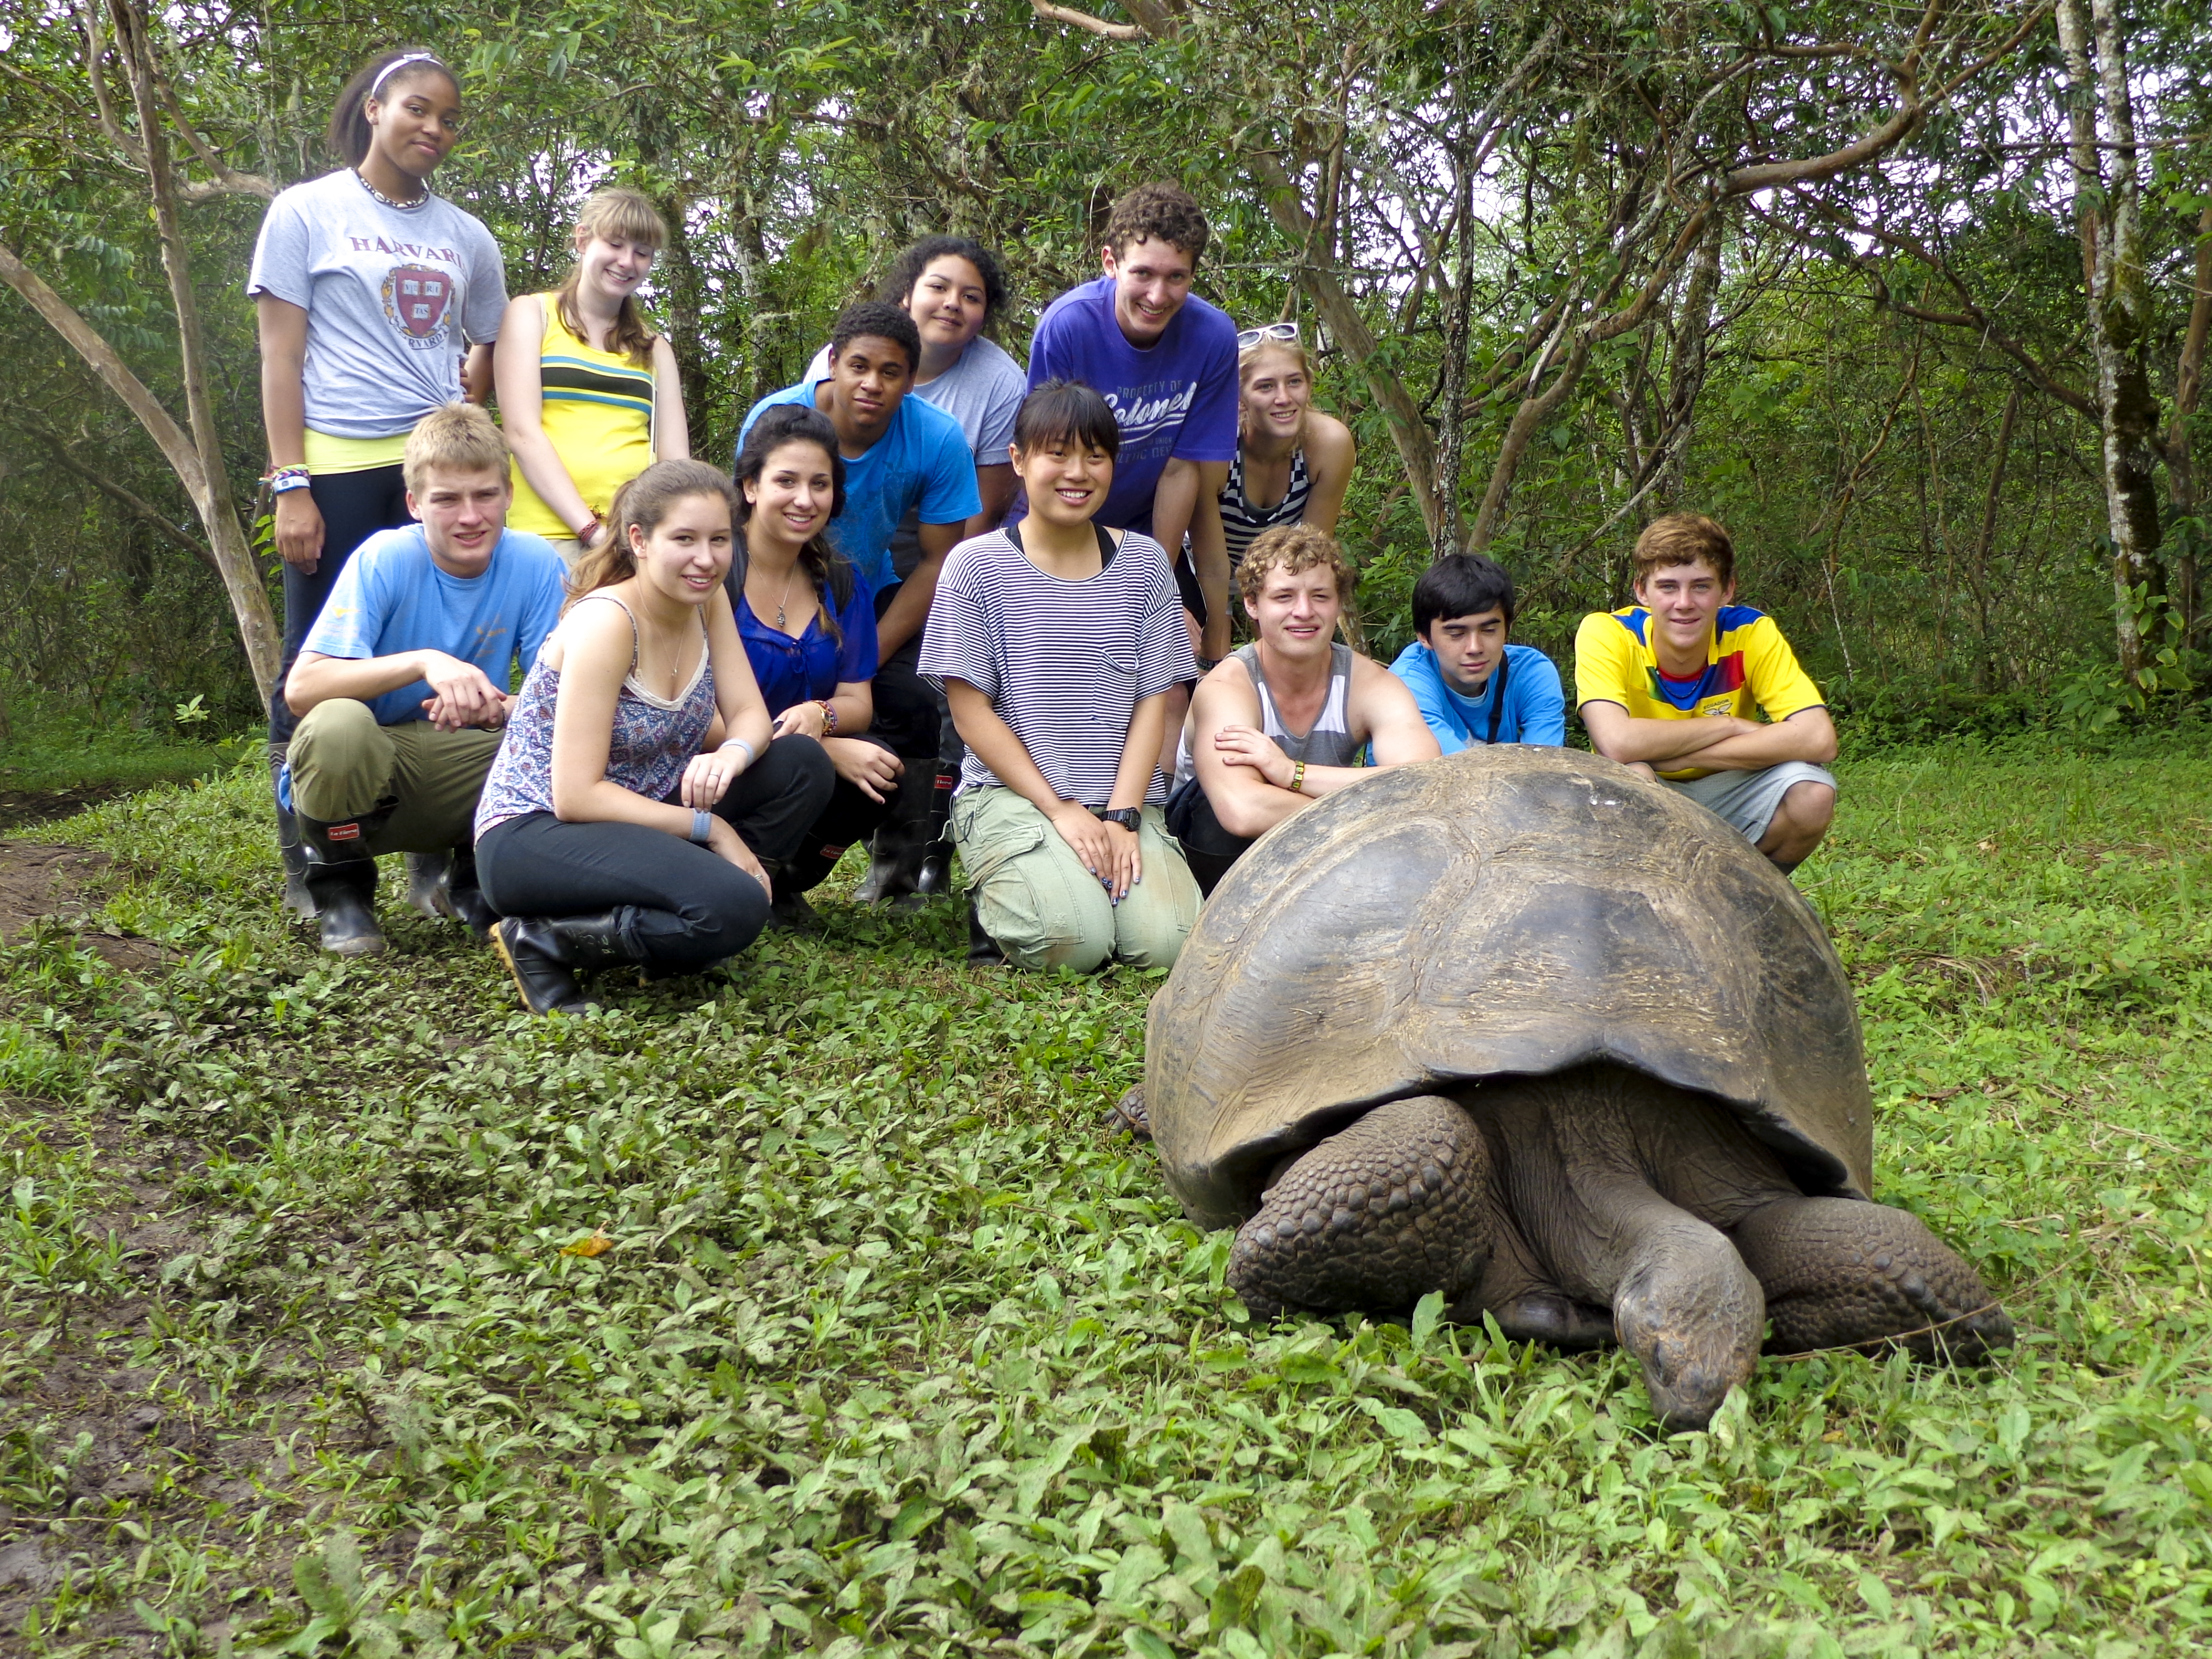 Travel to Ecuador to see natural wonders from the Andes mountains to the Amazon basin and the Galápagos Islands. Visit the Charles Darwin Research Station to learn about conservation efforts and receive a community service certificate upon program completion. Students with tortoise